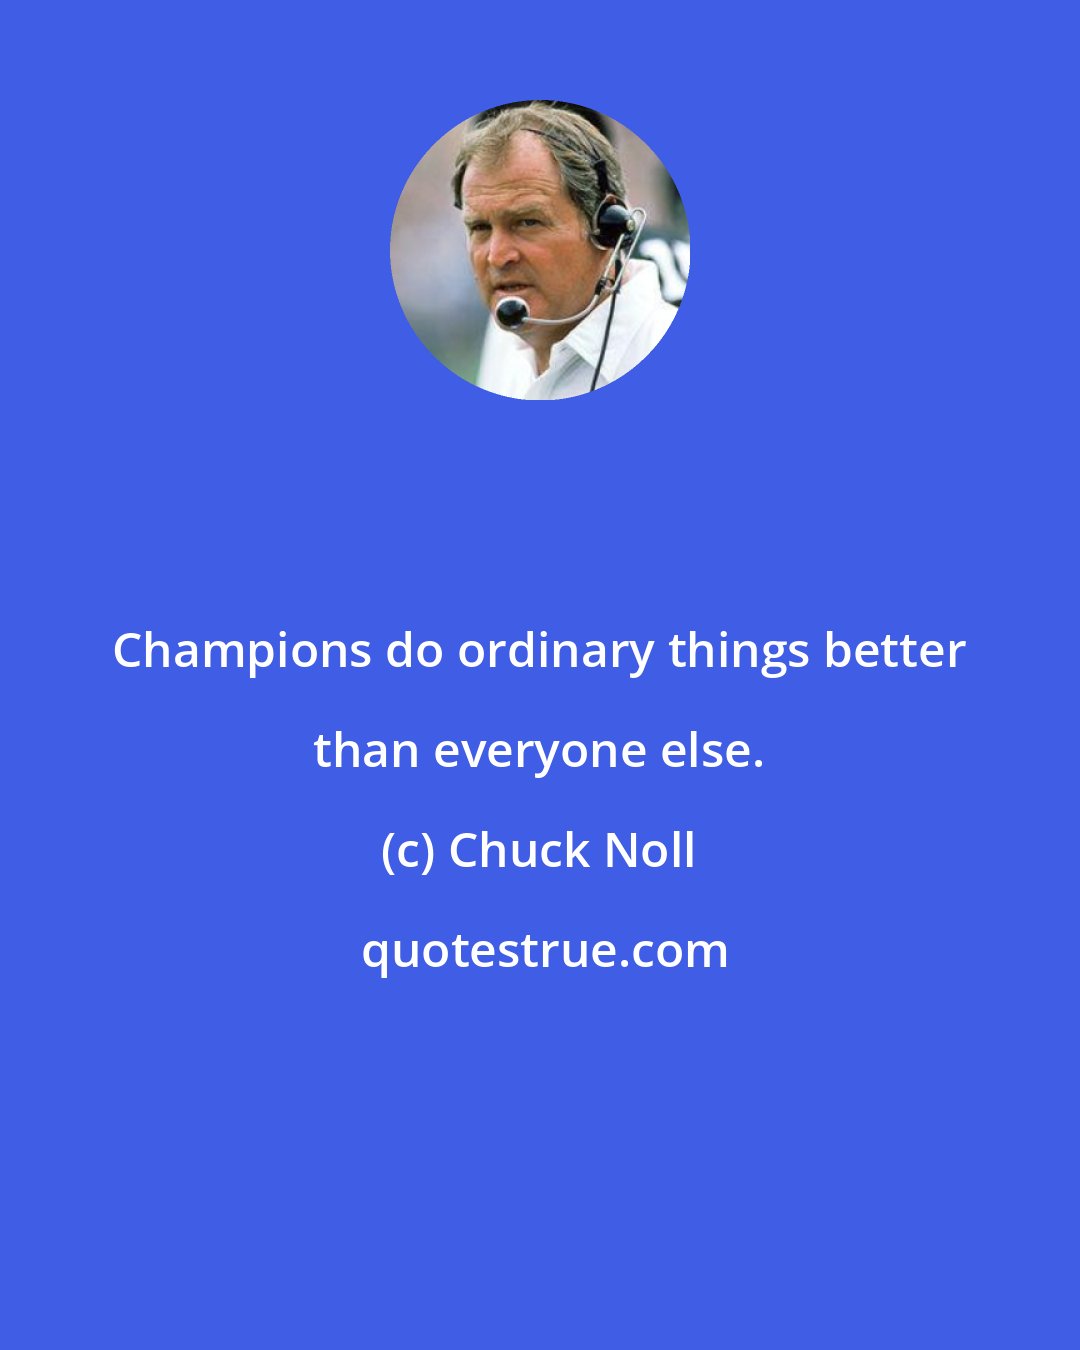 Chuck Noll: Champions do ordinary things better than everyone else.